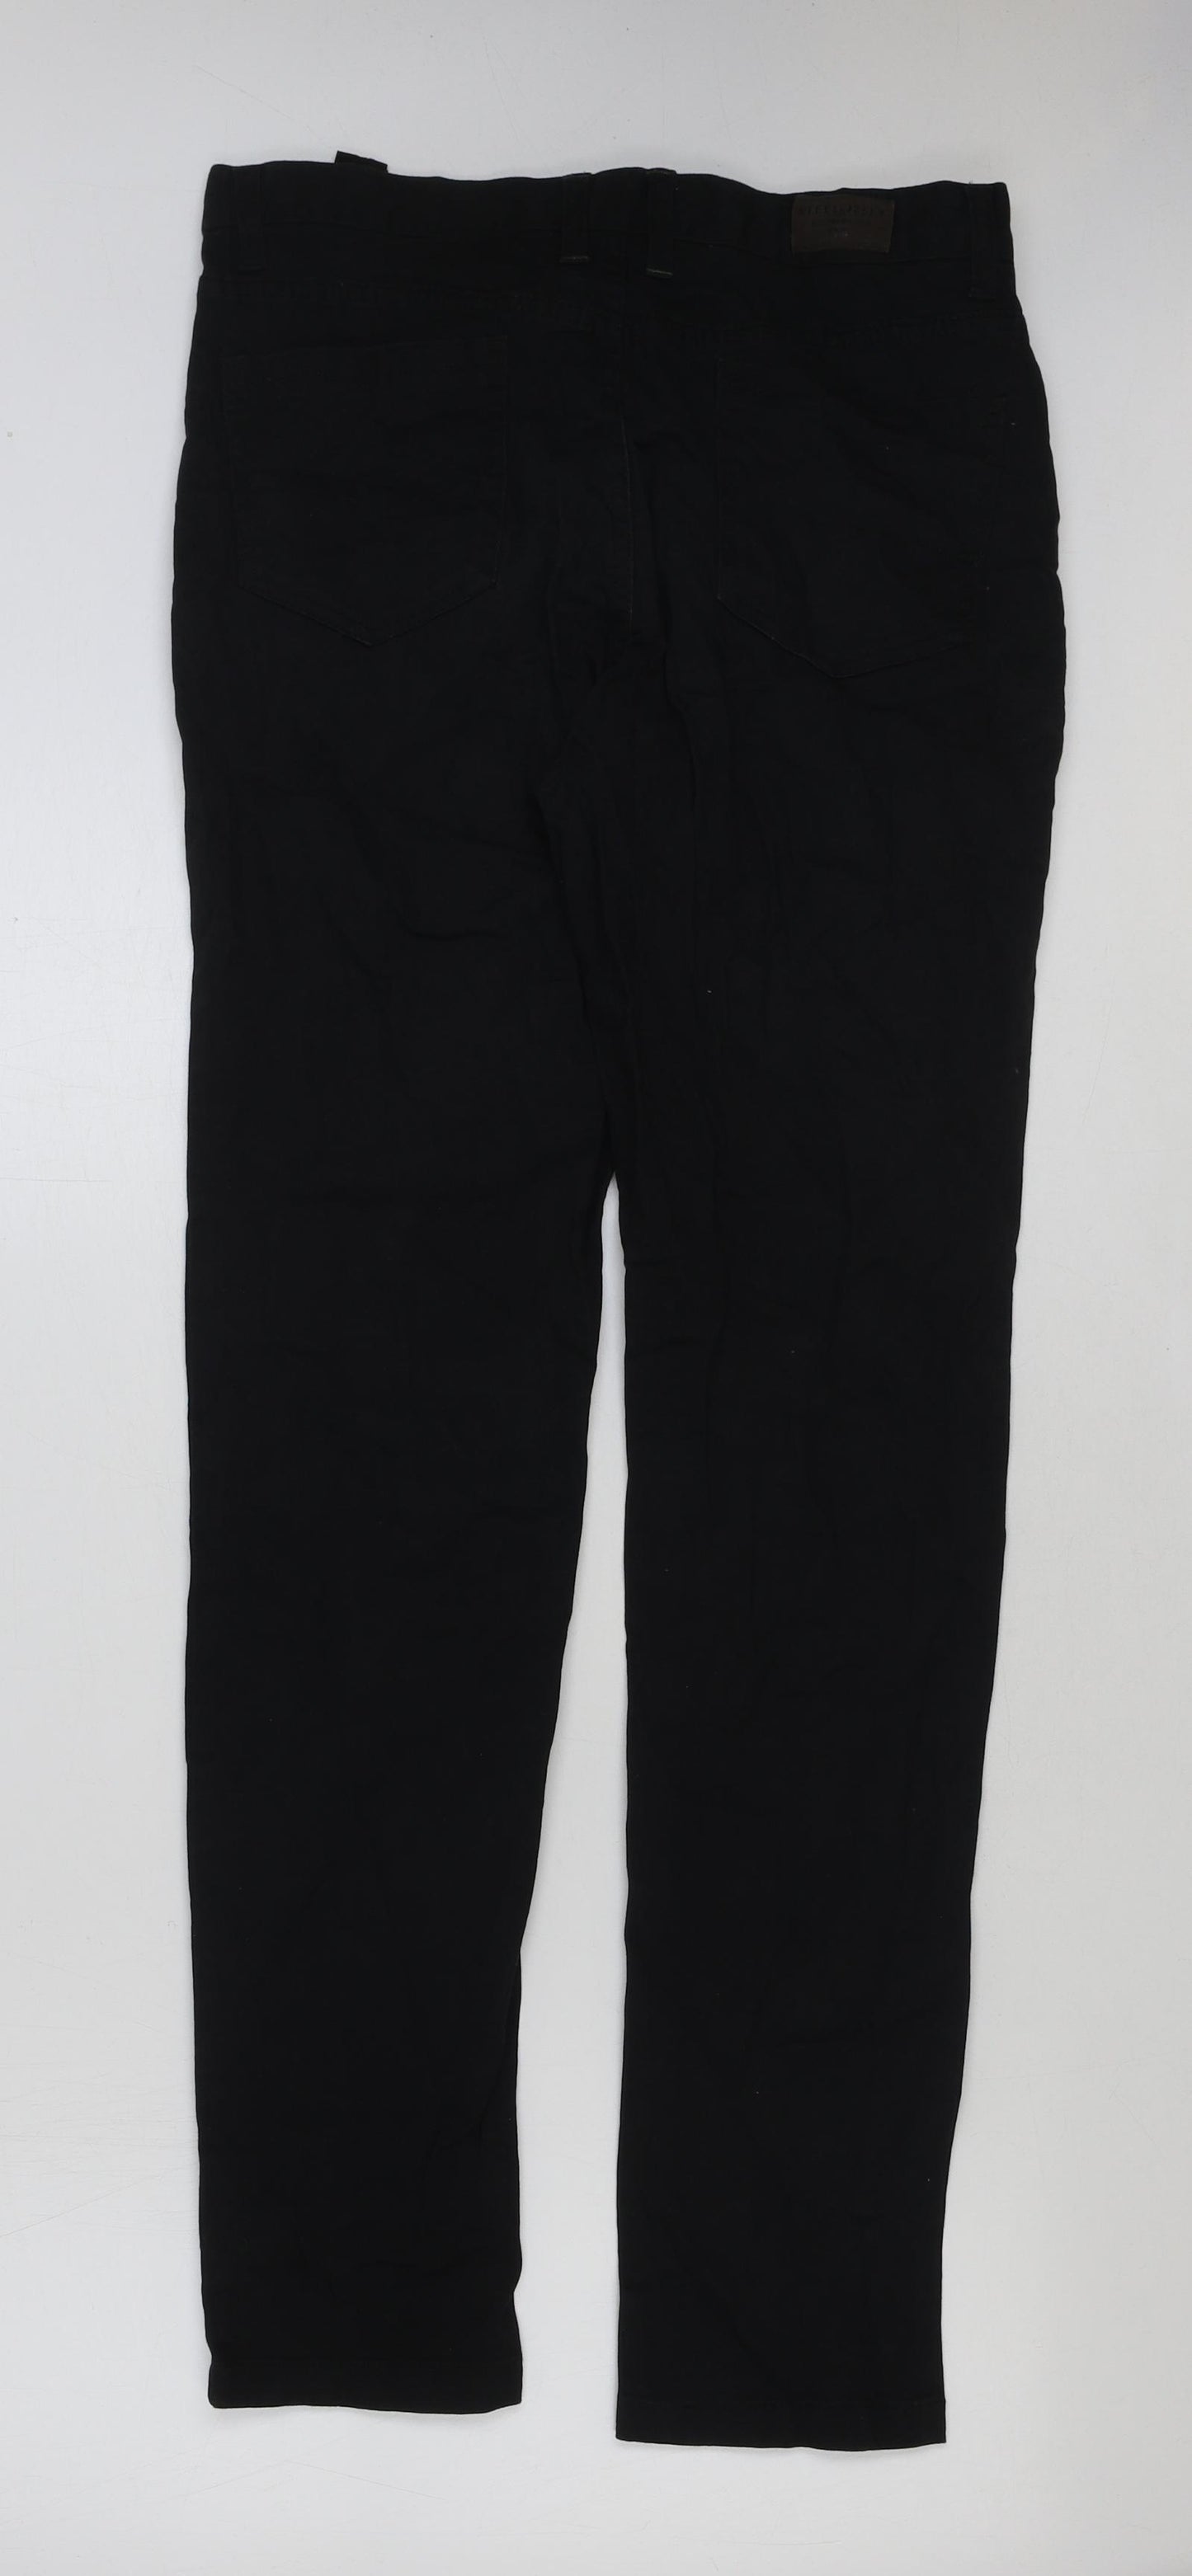 Steel & Jelly Mens Black Cotton Trousers Size 30 in L32 in Regular Button